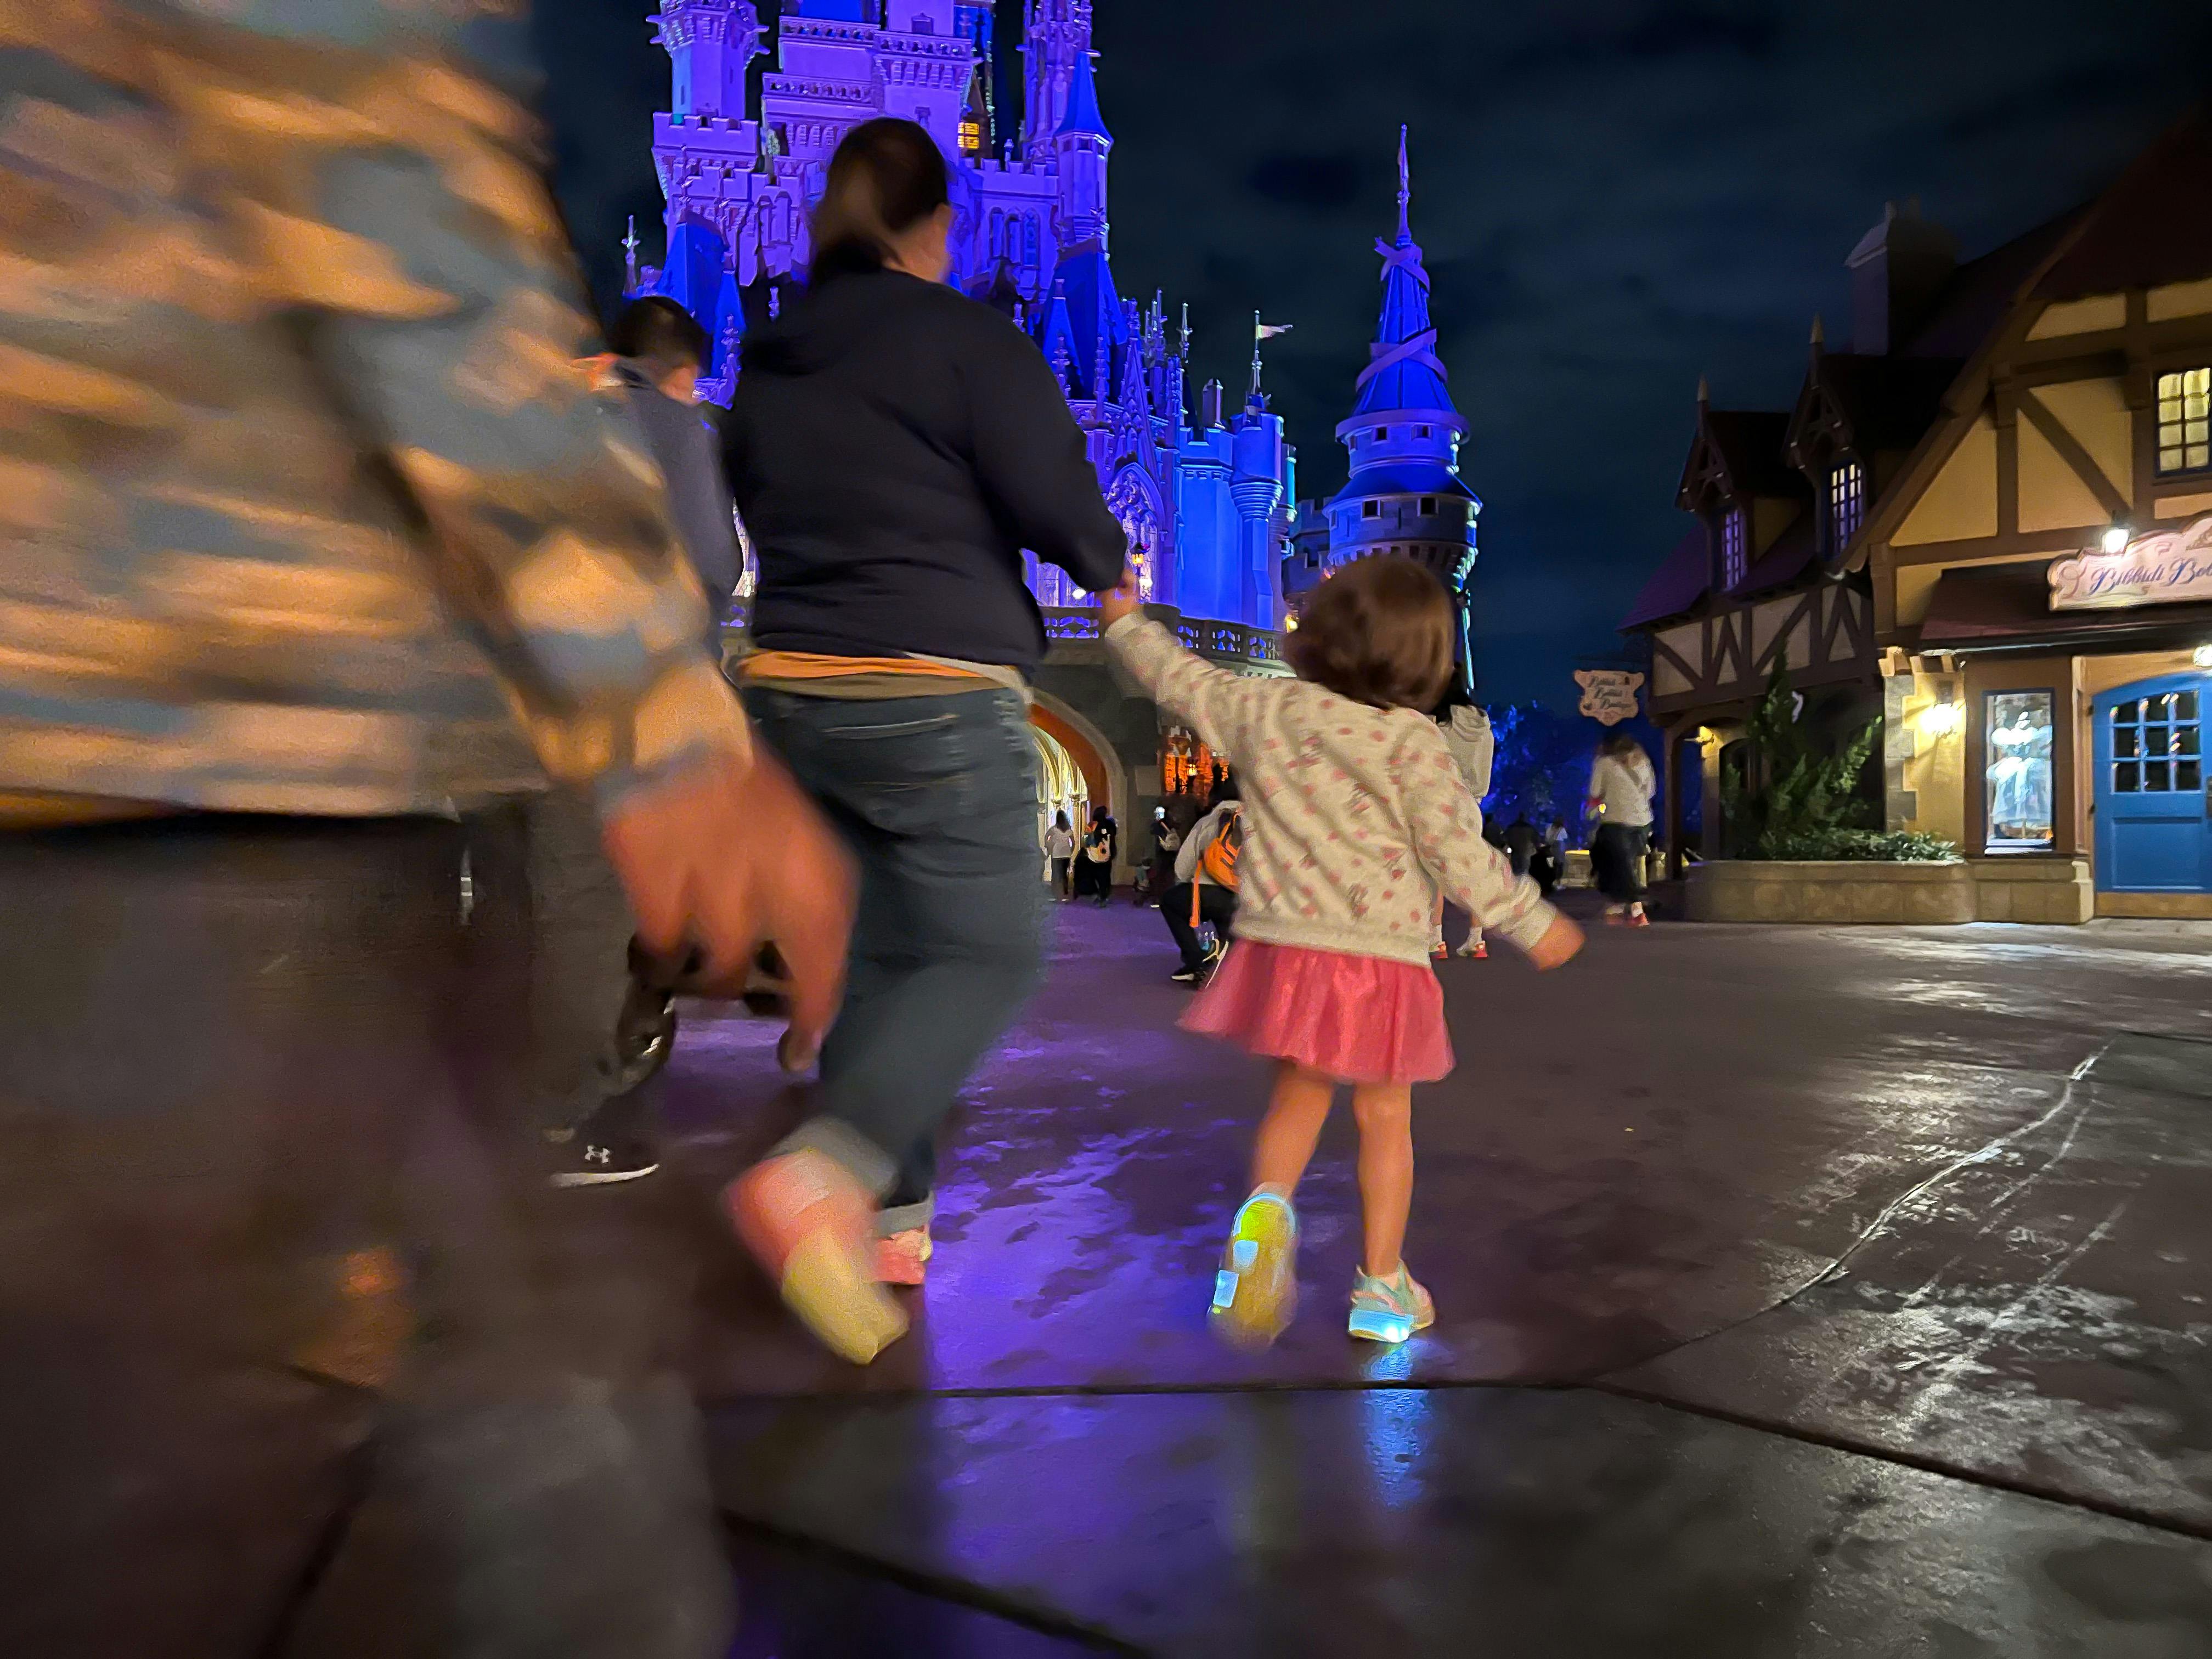 A mom and her child walking in front of the Magic Kingdom castle at Disney World.